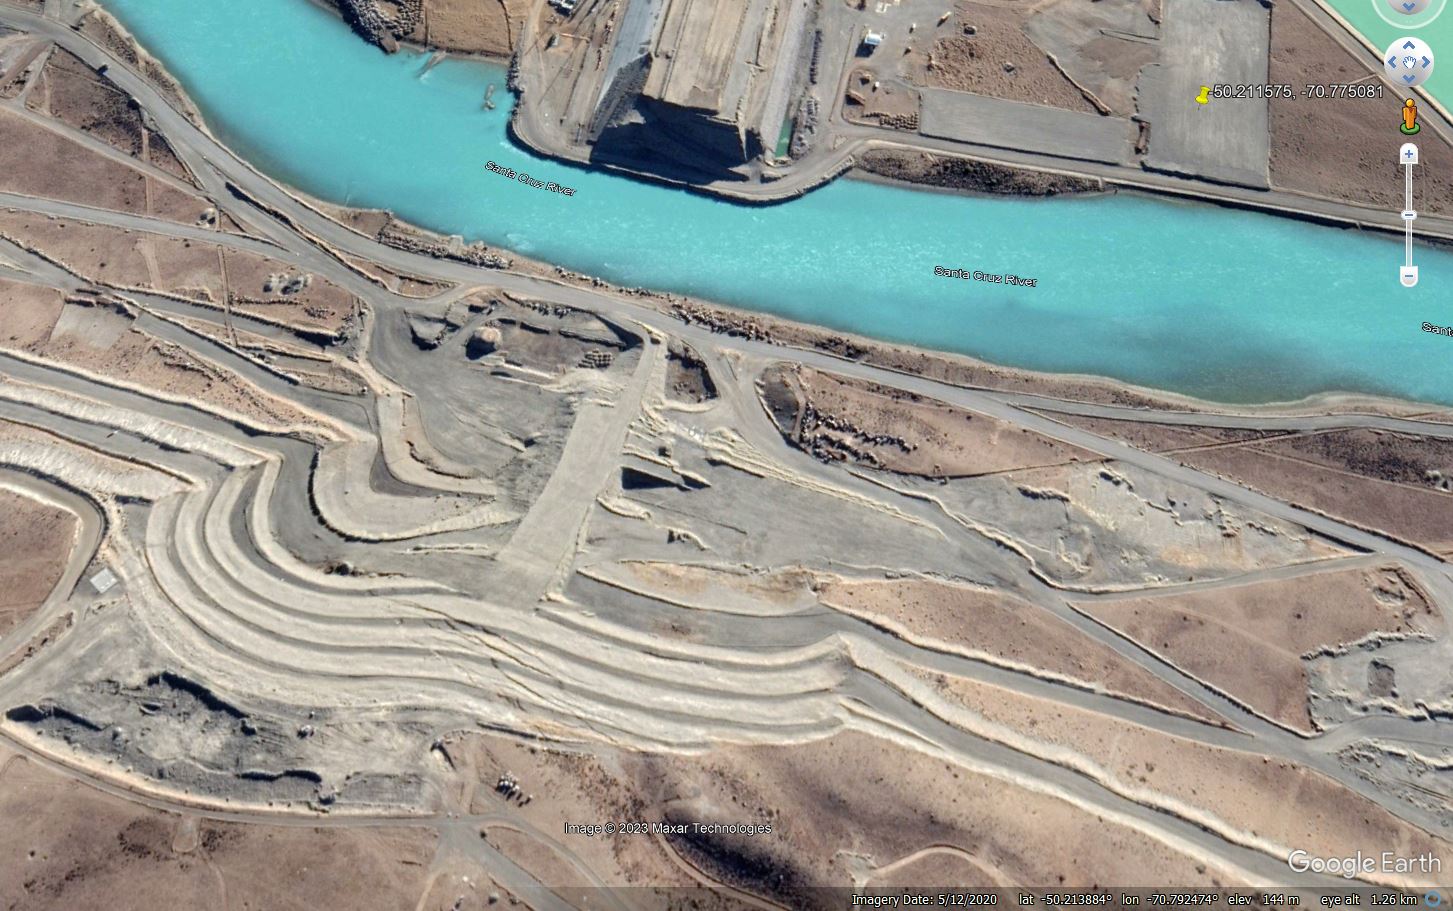 Google Earth image of the groundworks at the Cóndor Cliff Dam in Argentina in May 2020.